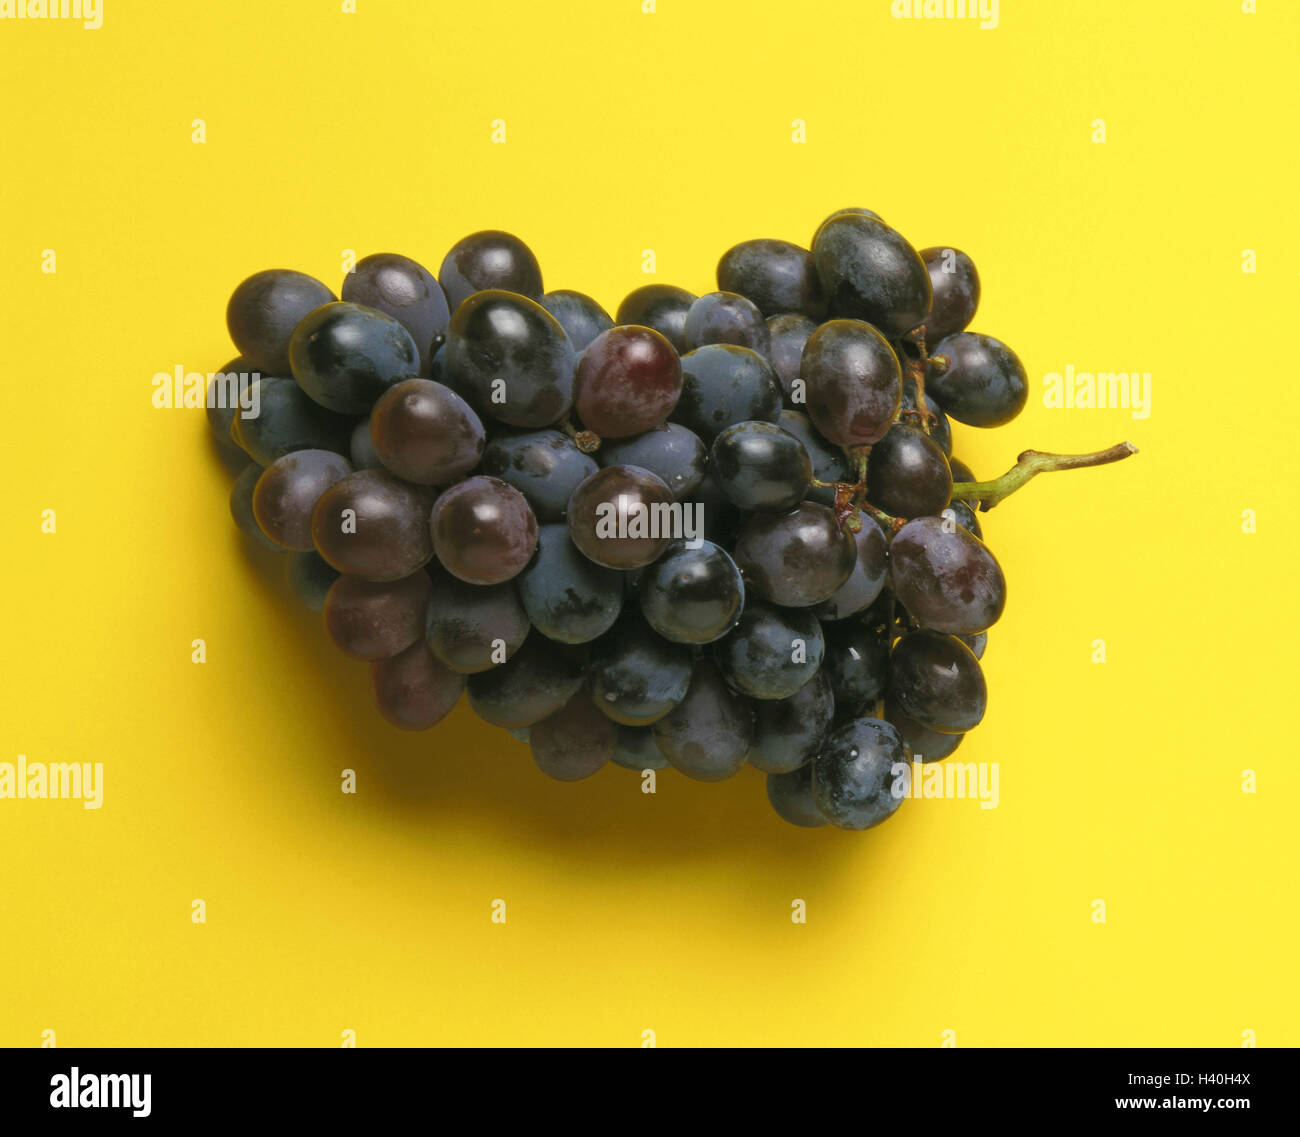 Grapes, blue, grapes, wine fruits, fruits, grapes, fruit, vitamins, rich in vitamins, food, Still life, product photography, subsoil yellow, conception Stock Photo